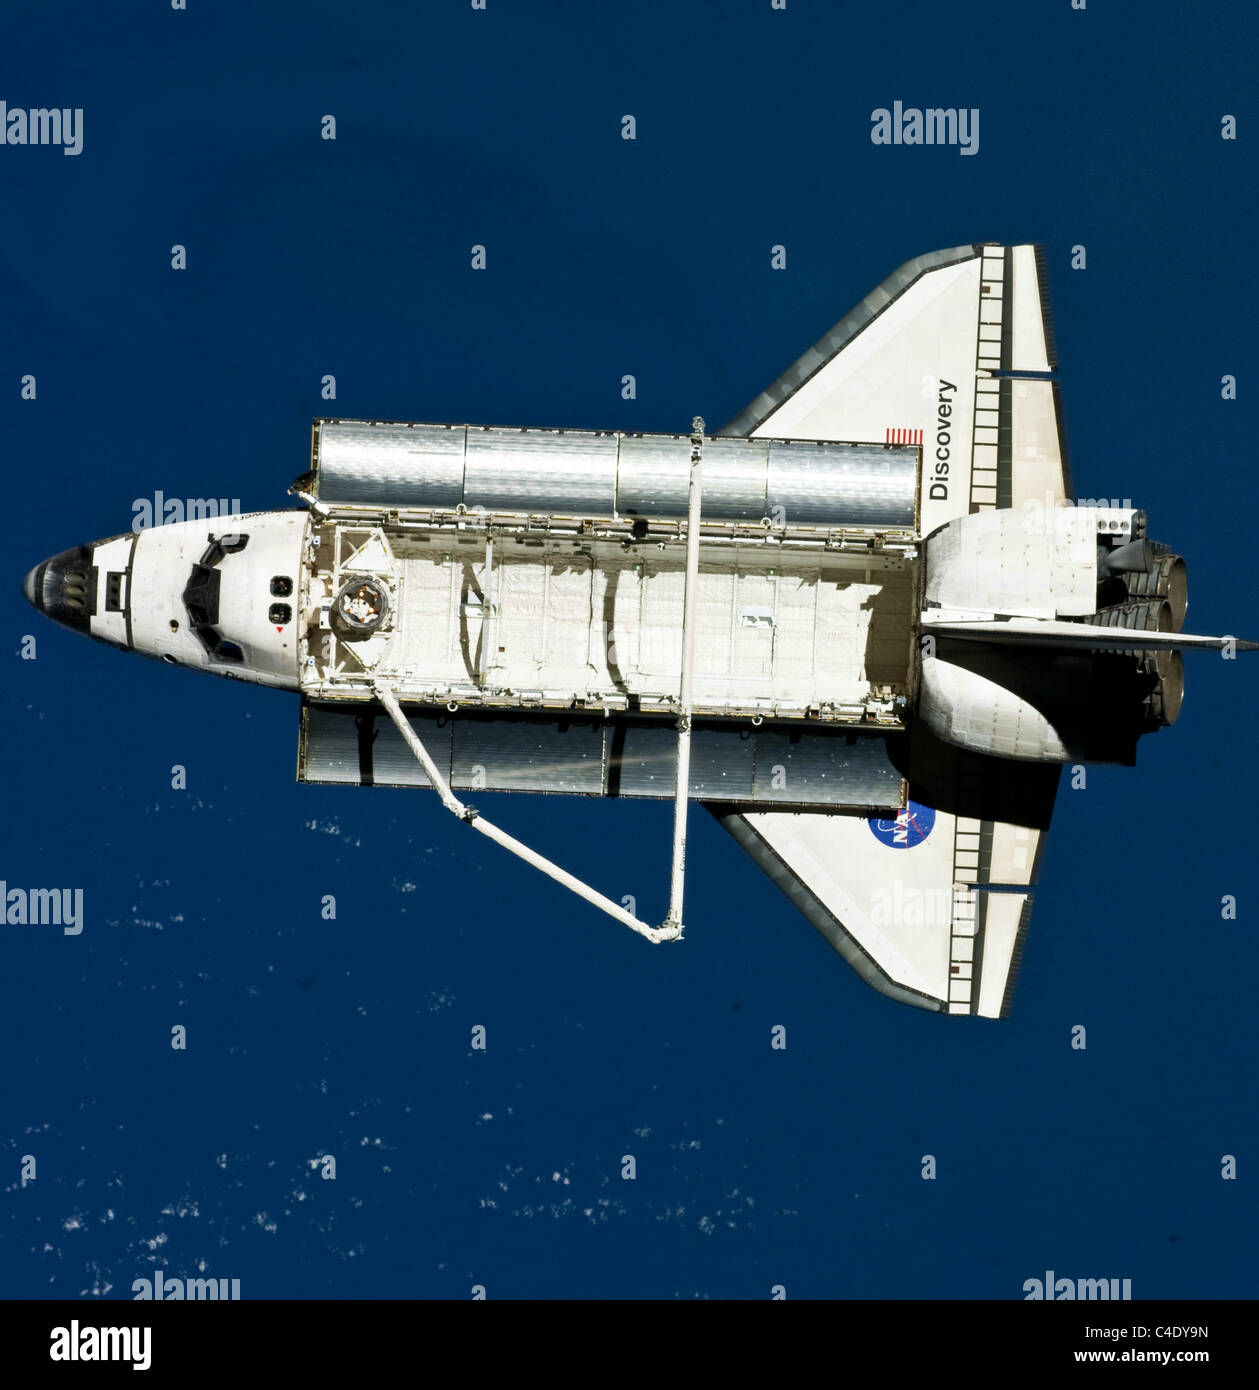 Space shuttle Discovery viewed from above in orbit Stock Photo